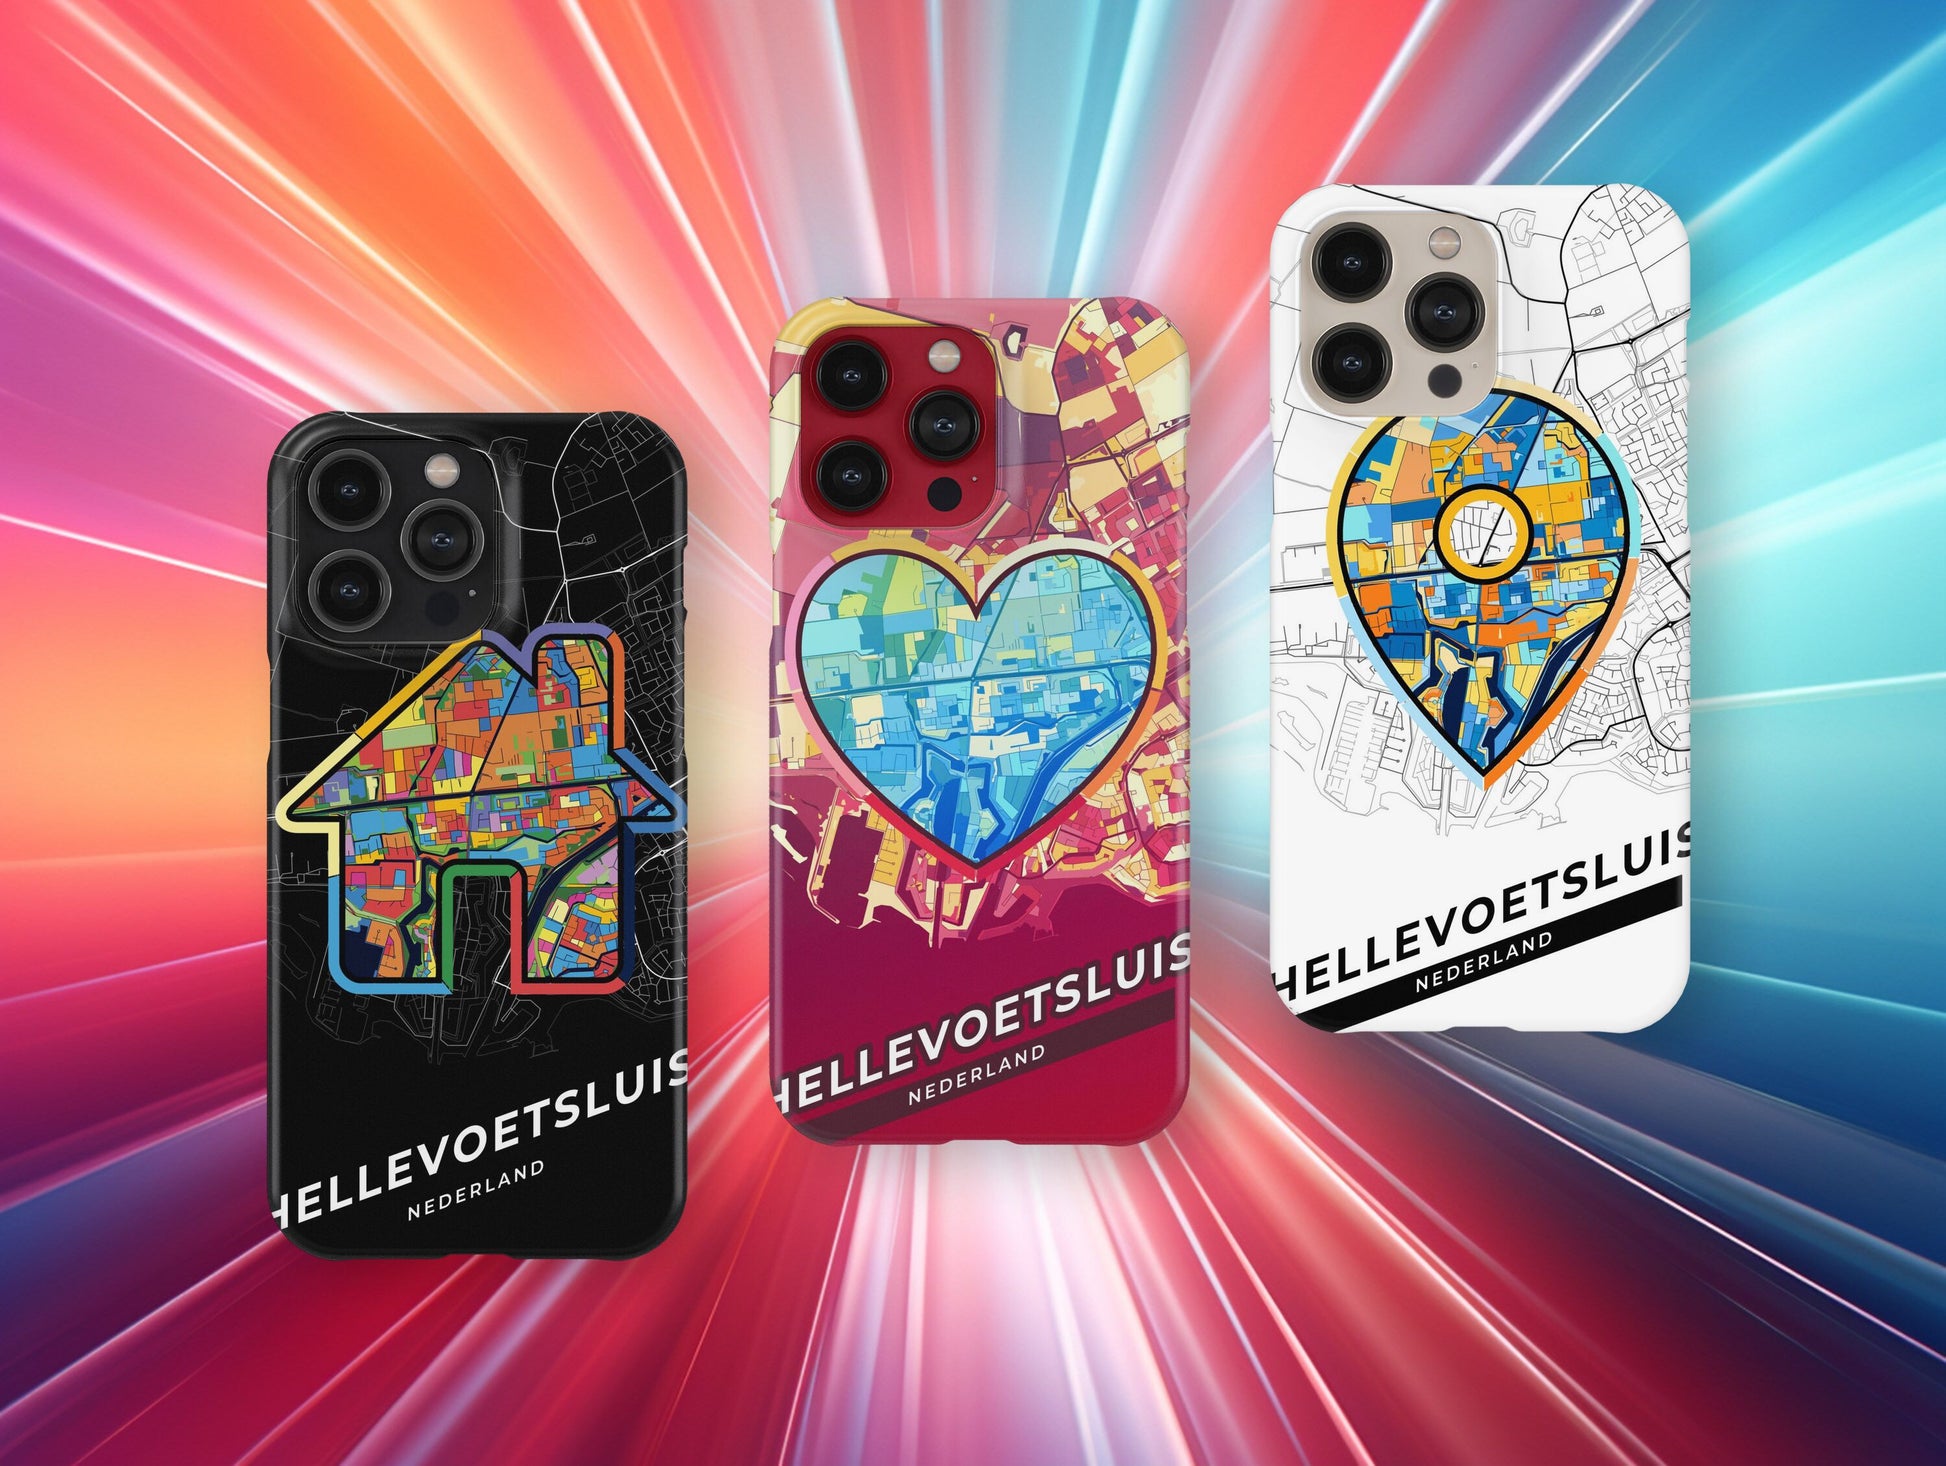 Hellevoetsluis Netherlands slim phone case with colorful icon. Birthday, wedding or housewarming gift. Couple match cases.